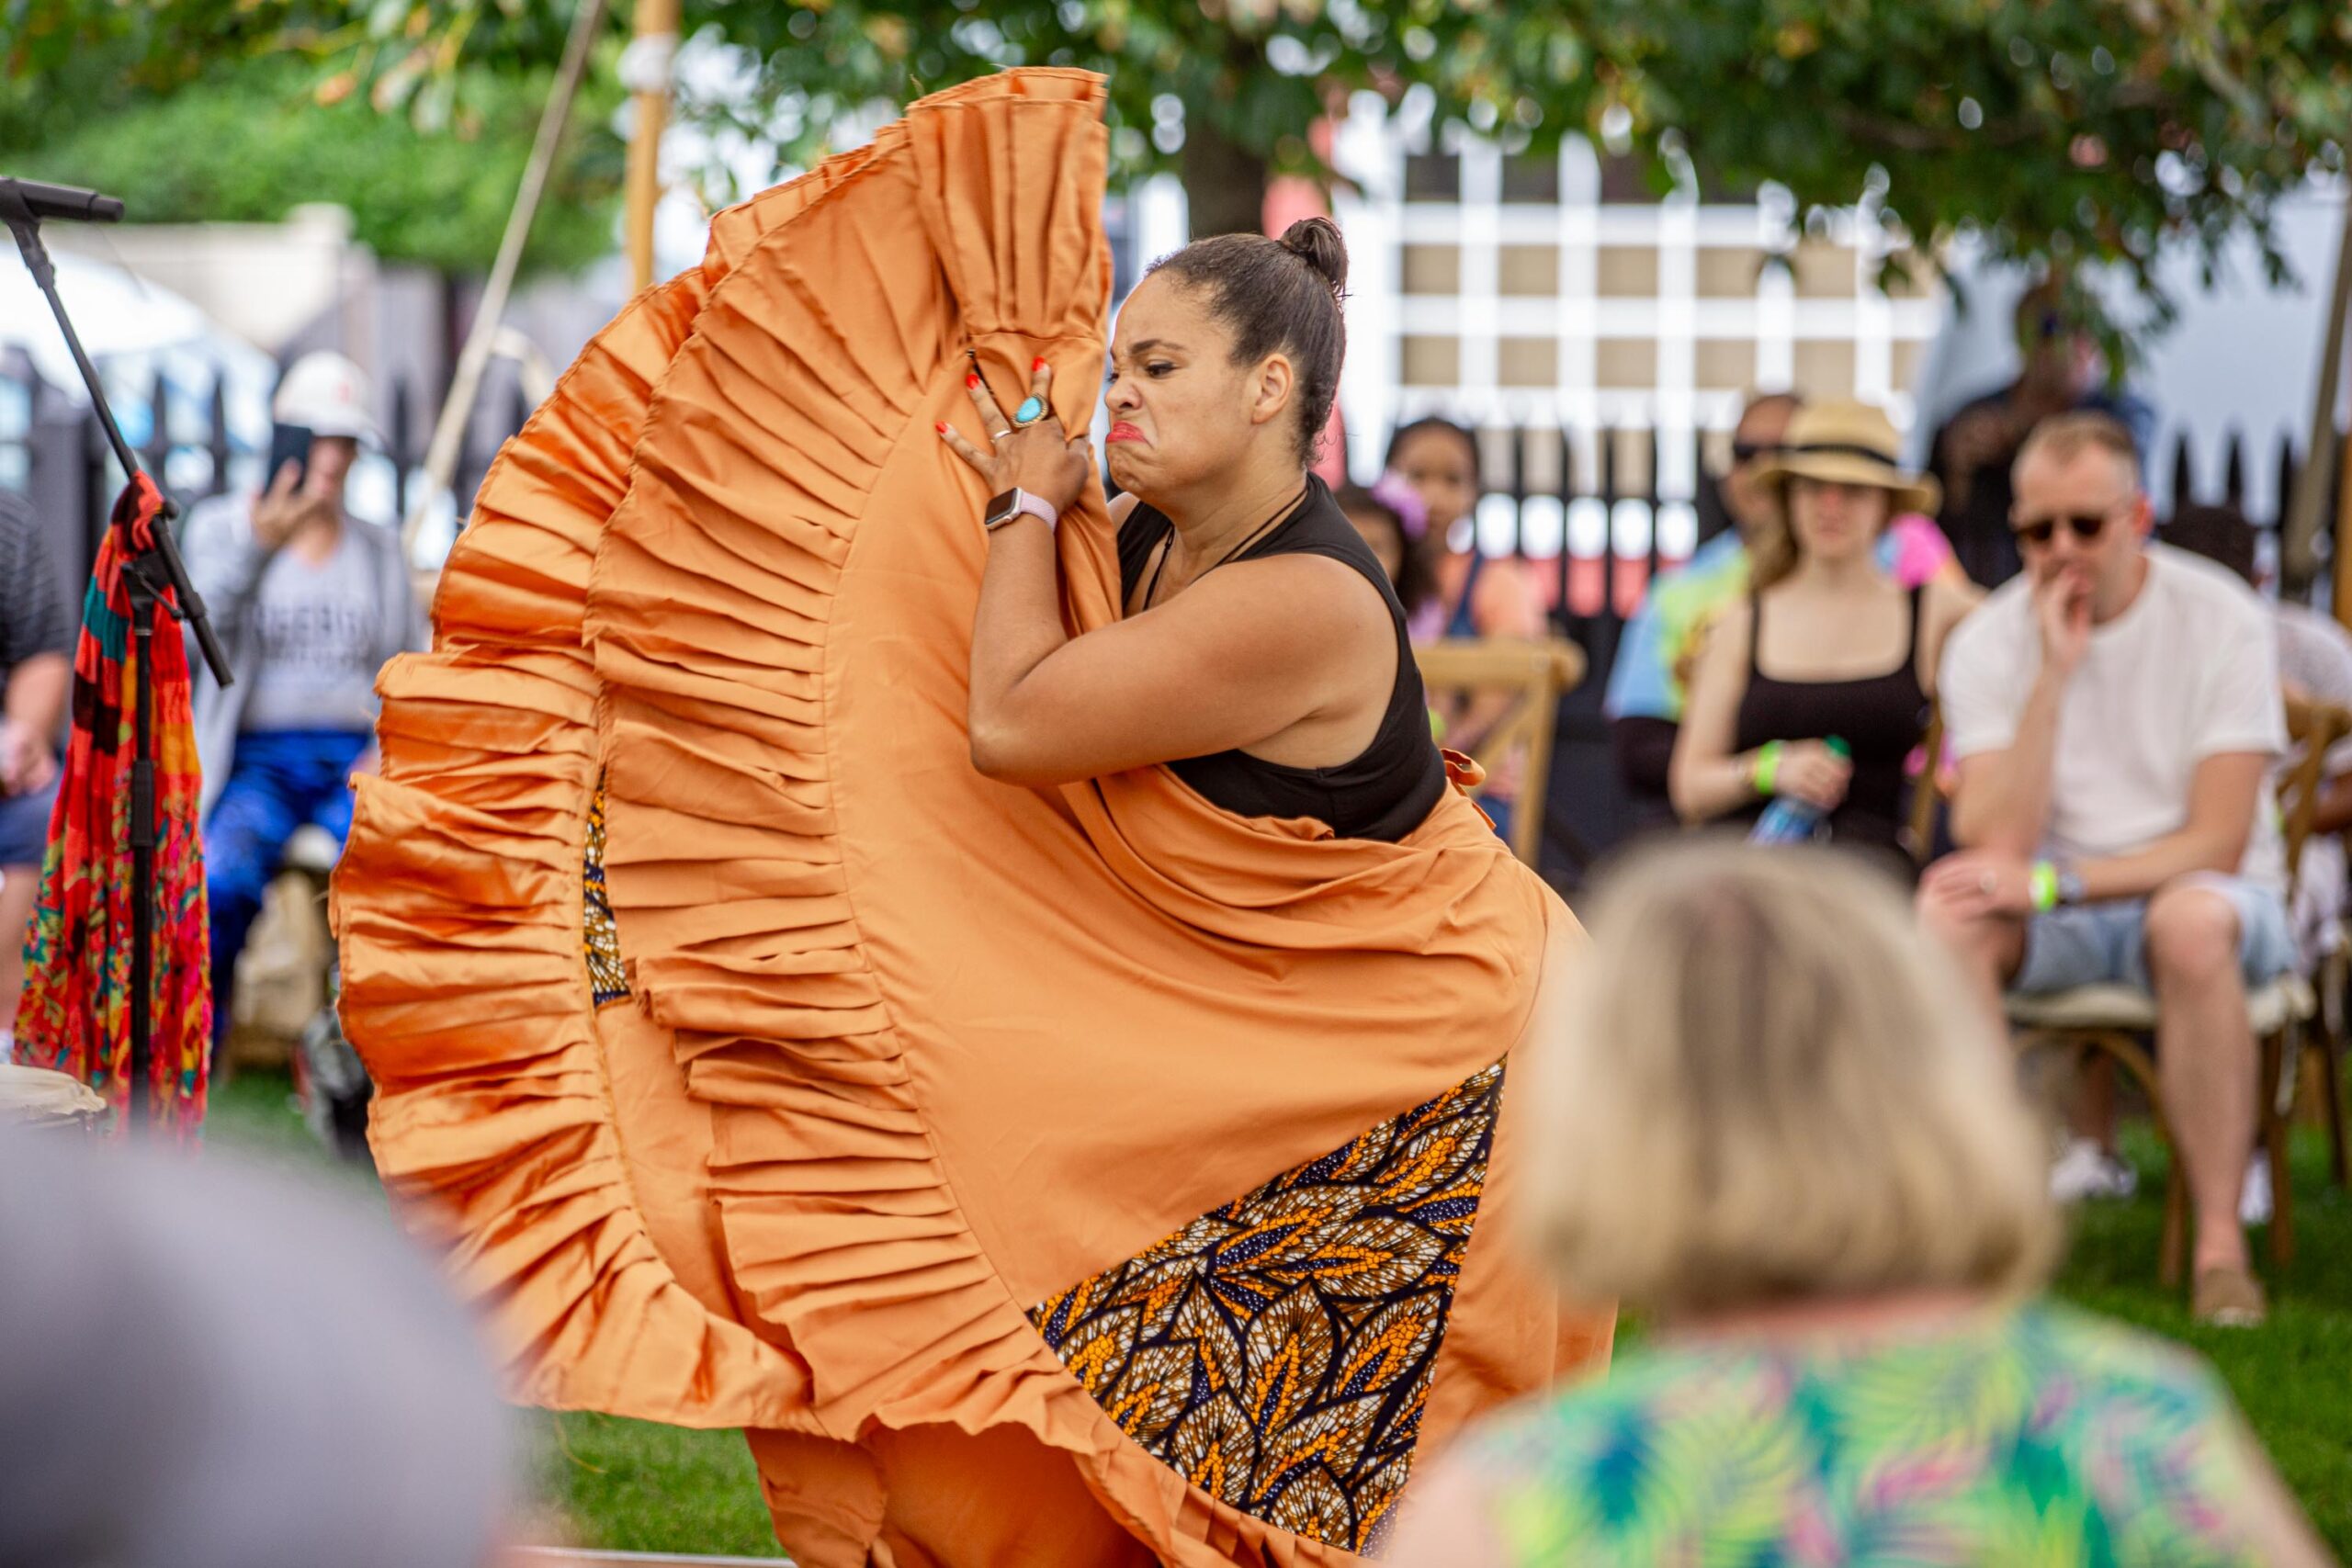 A Puerto Rican Bomba dancer in an orange dress dancing in front of a crowd.